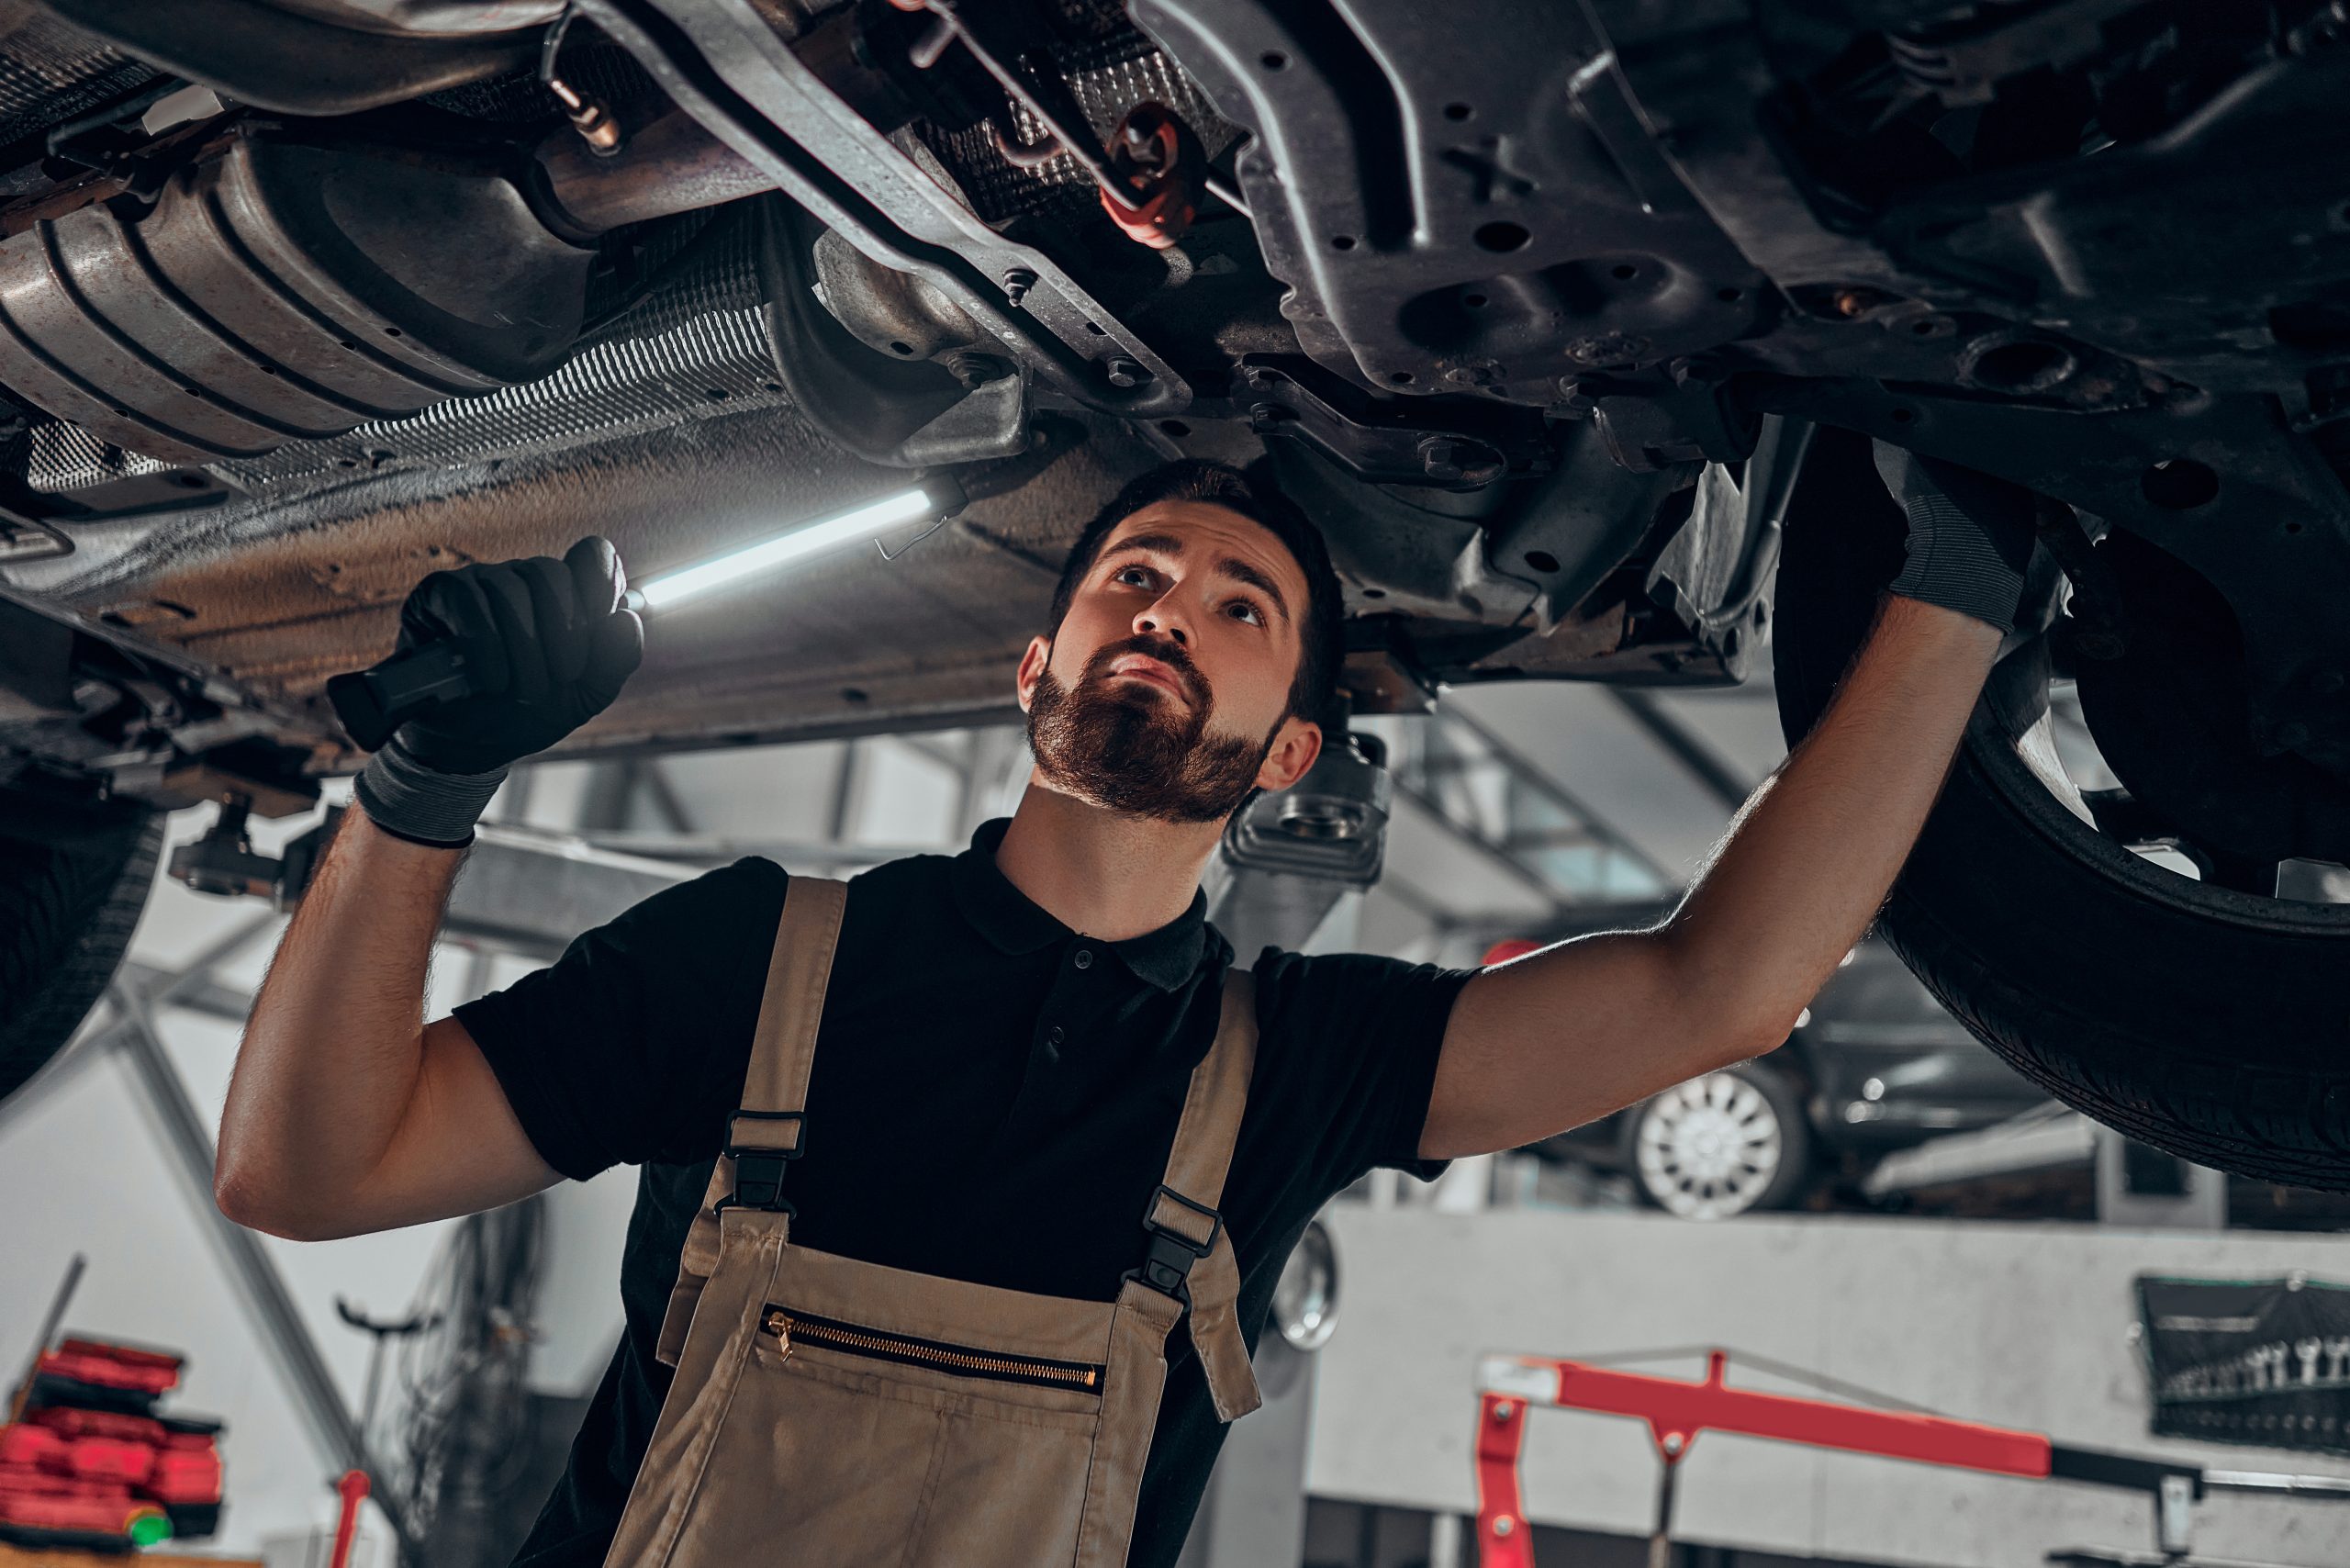 Is Auto Manufacturing A Good Career Path?